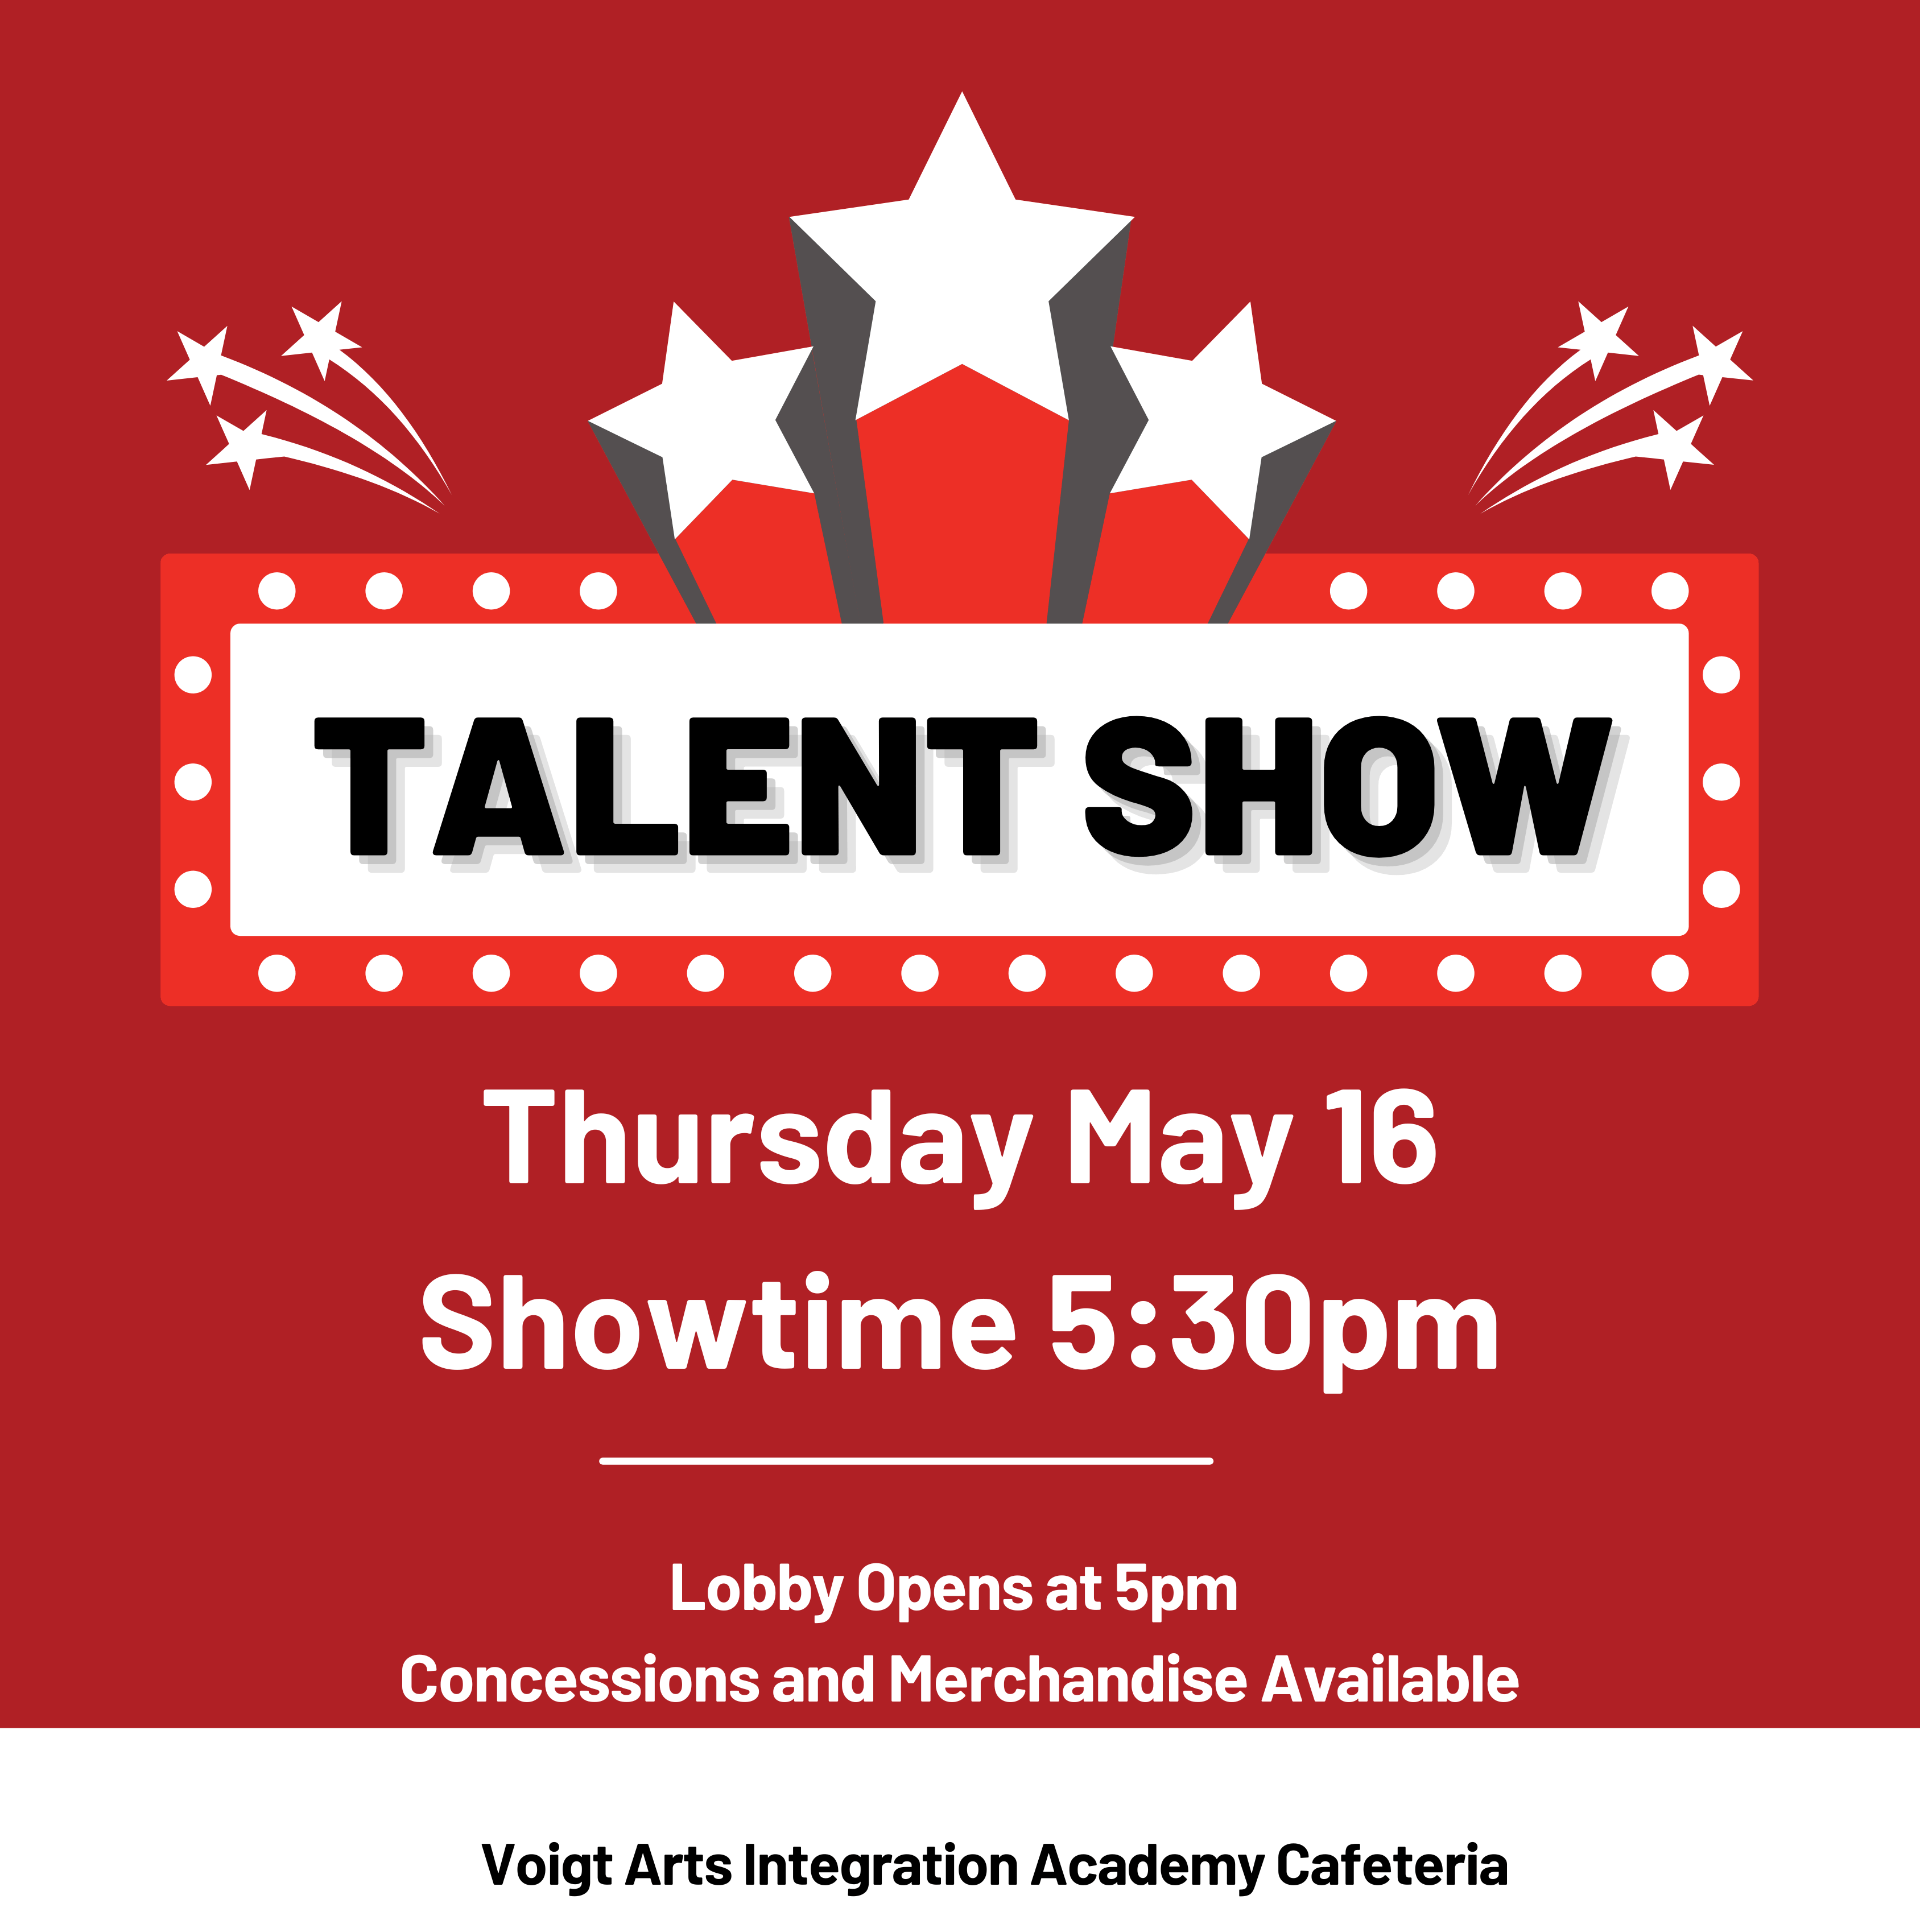 Talent Show, Thrusday May 16th. Showtime 5:30 pm. Lobby opens at 5pm. Concessions available. Location: Voigt Cafeteria.